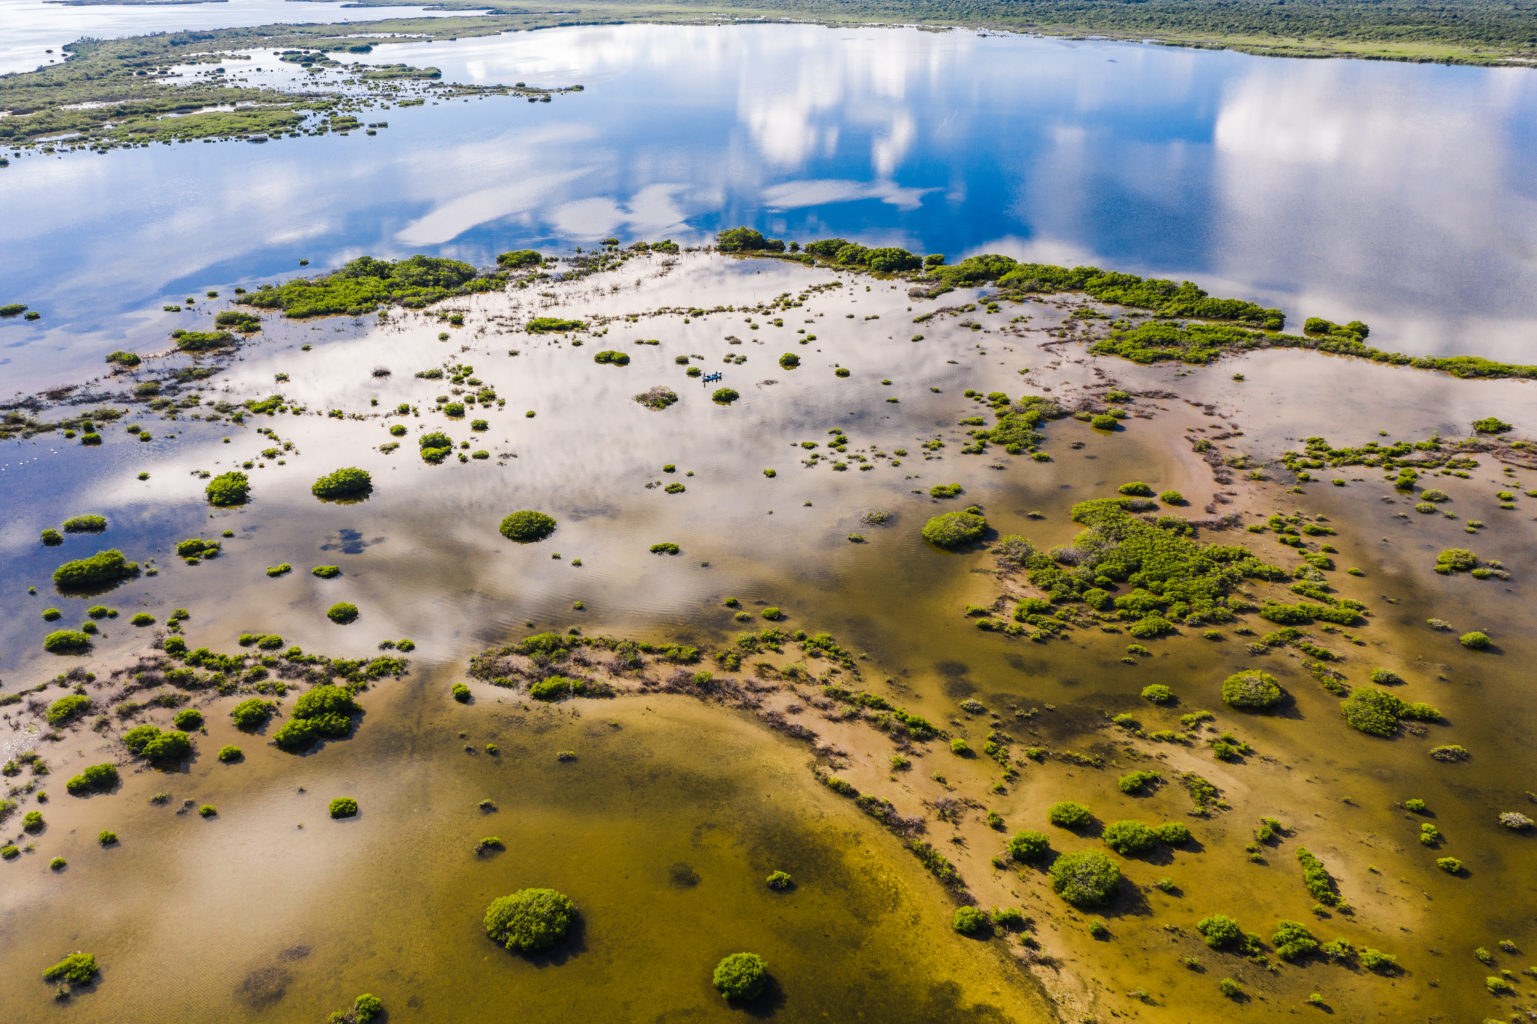 An aerial shot of shallow mangrove waters